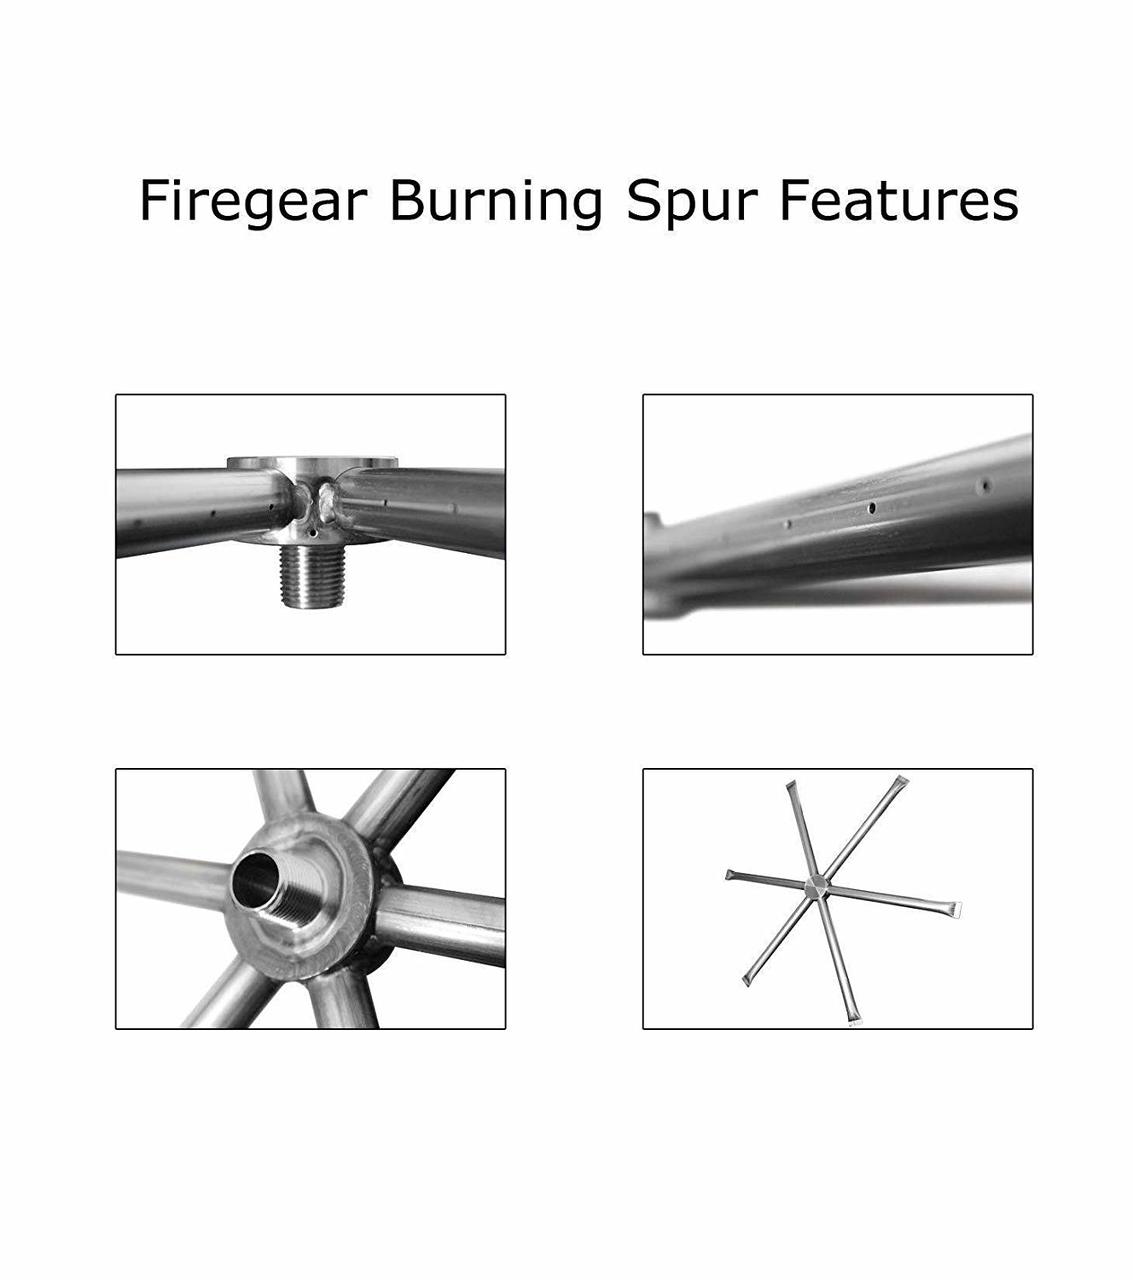 Firegear Round Stainless Steel Burning Spur Kit for Outdoor Fire-pit - Match Light Ignition